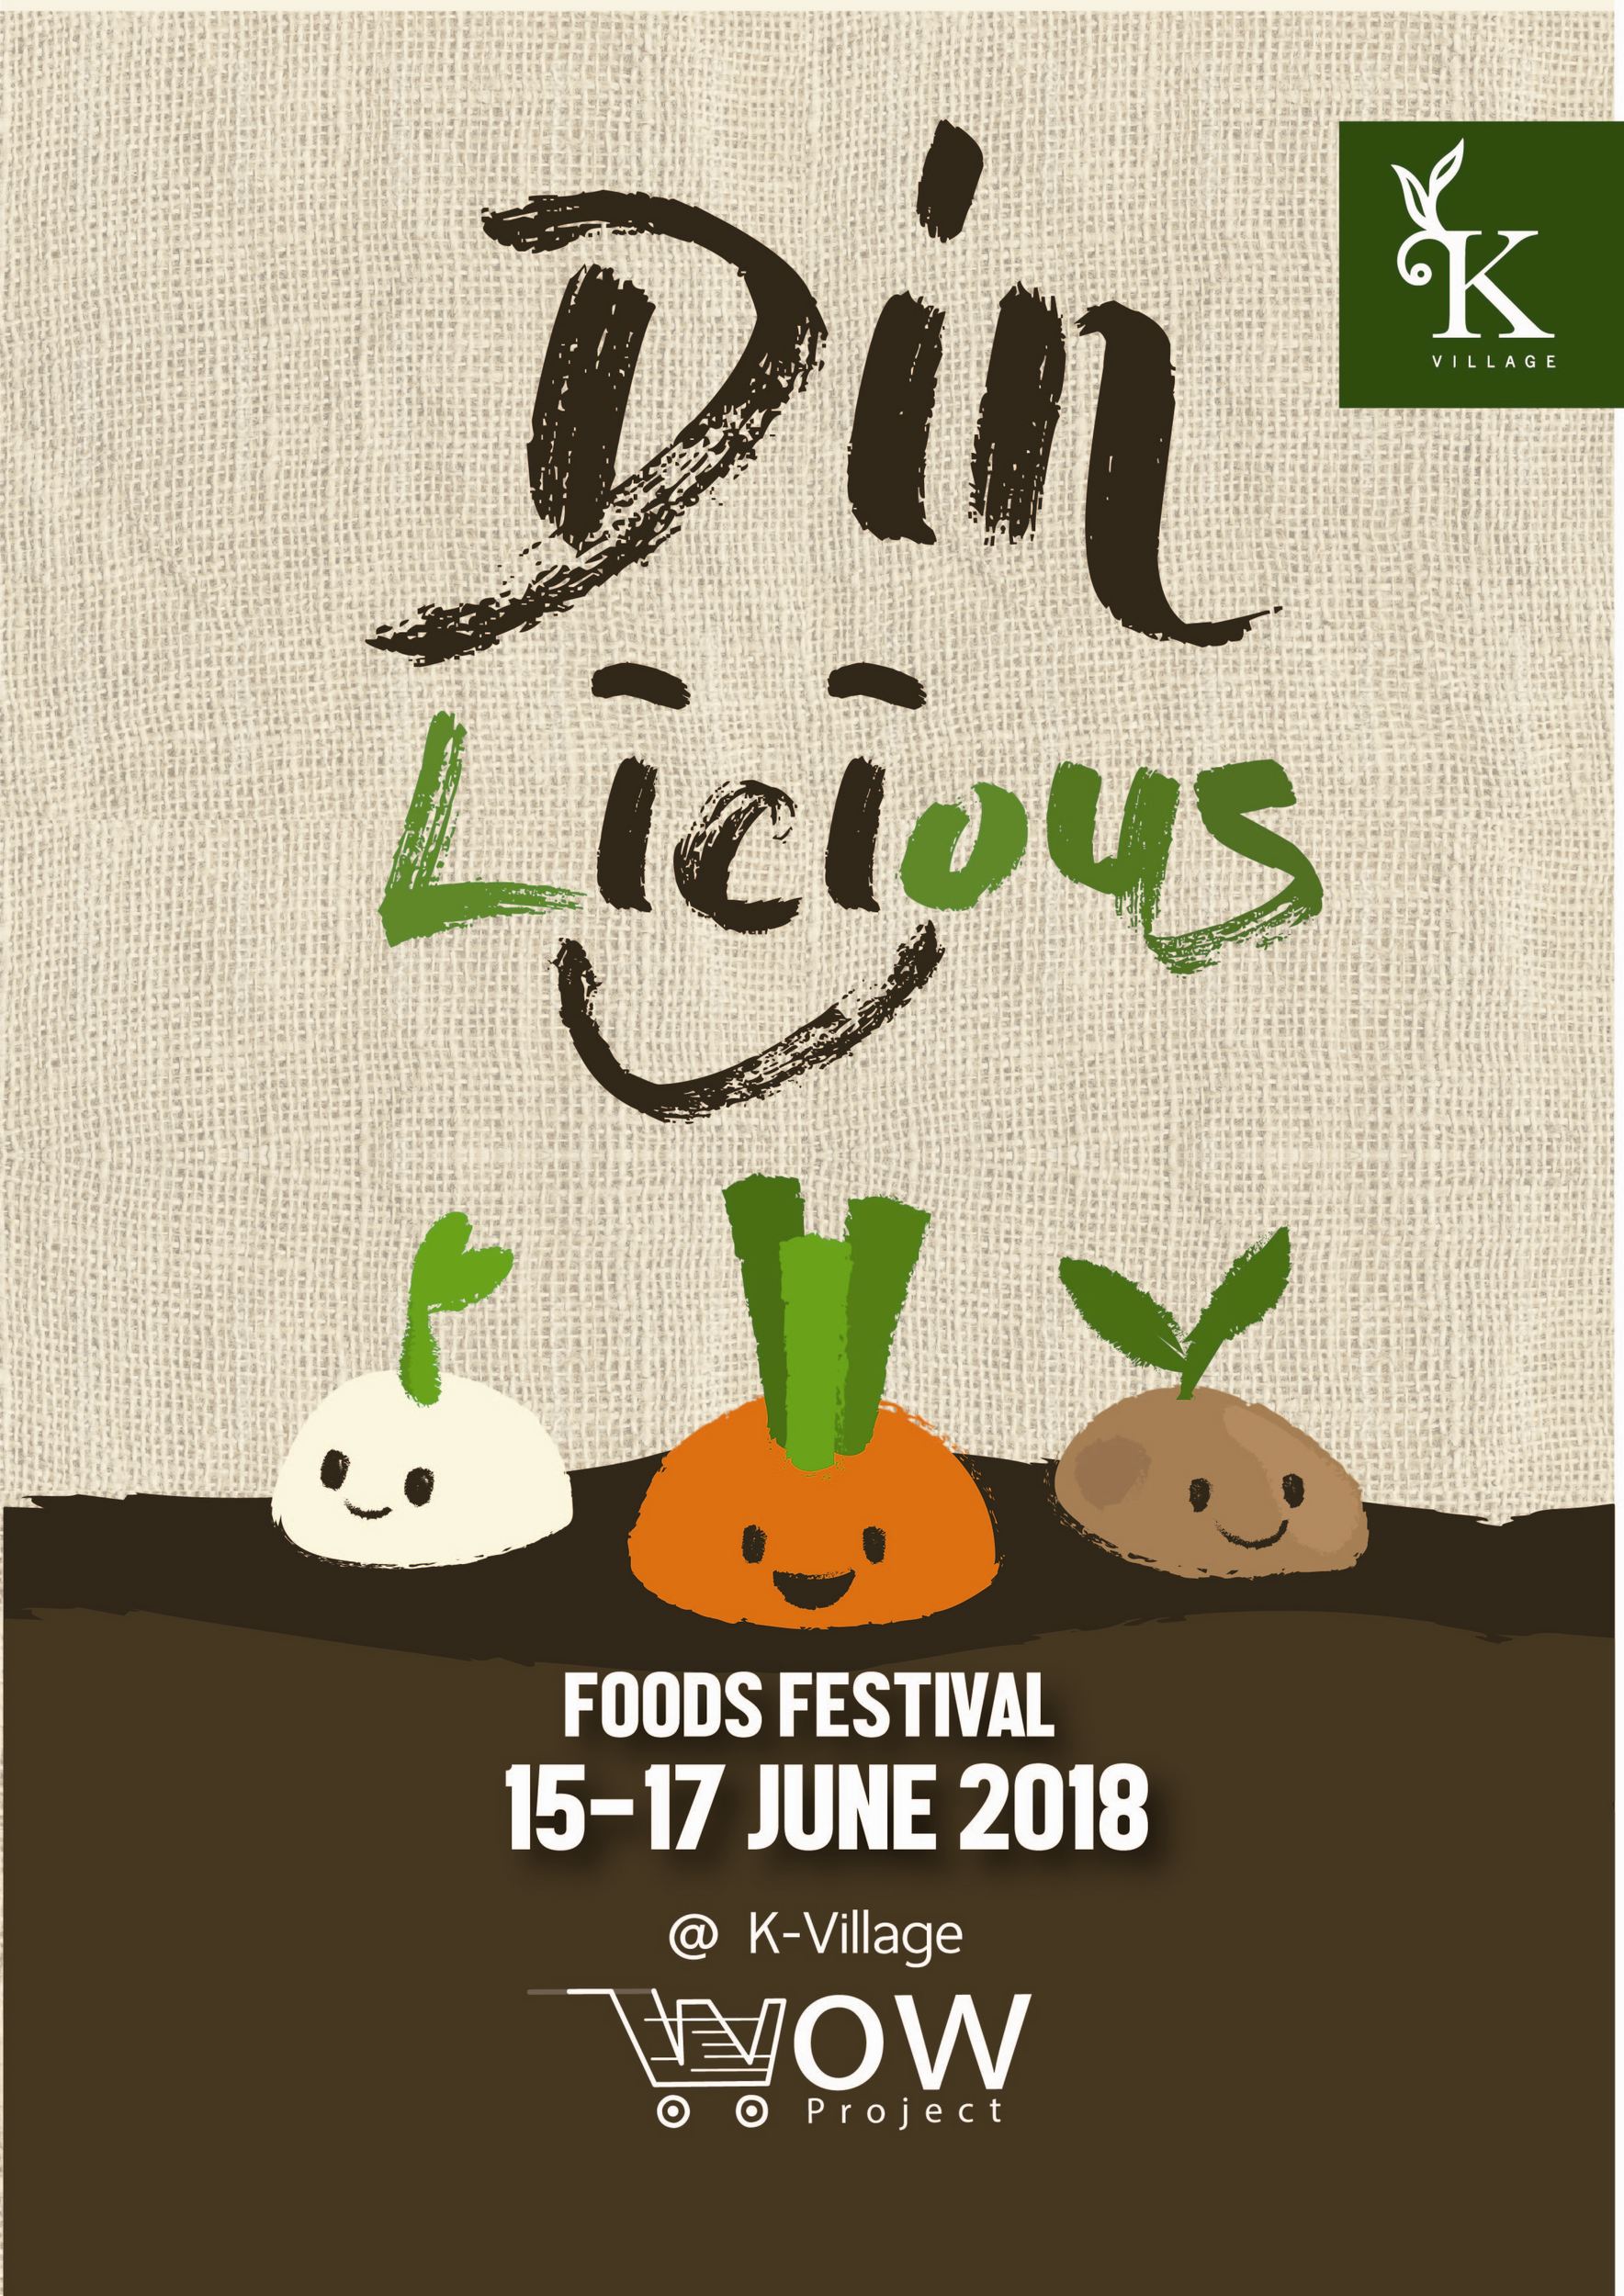 Wow project Food Fest : Din Licious